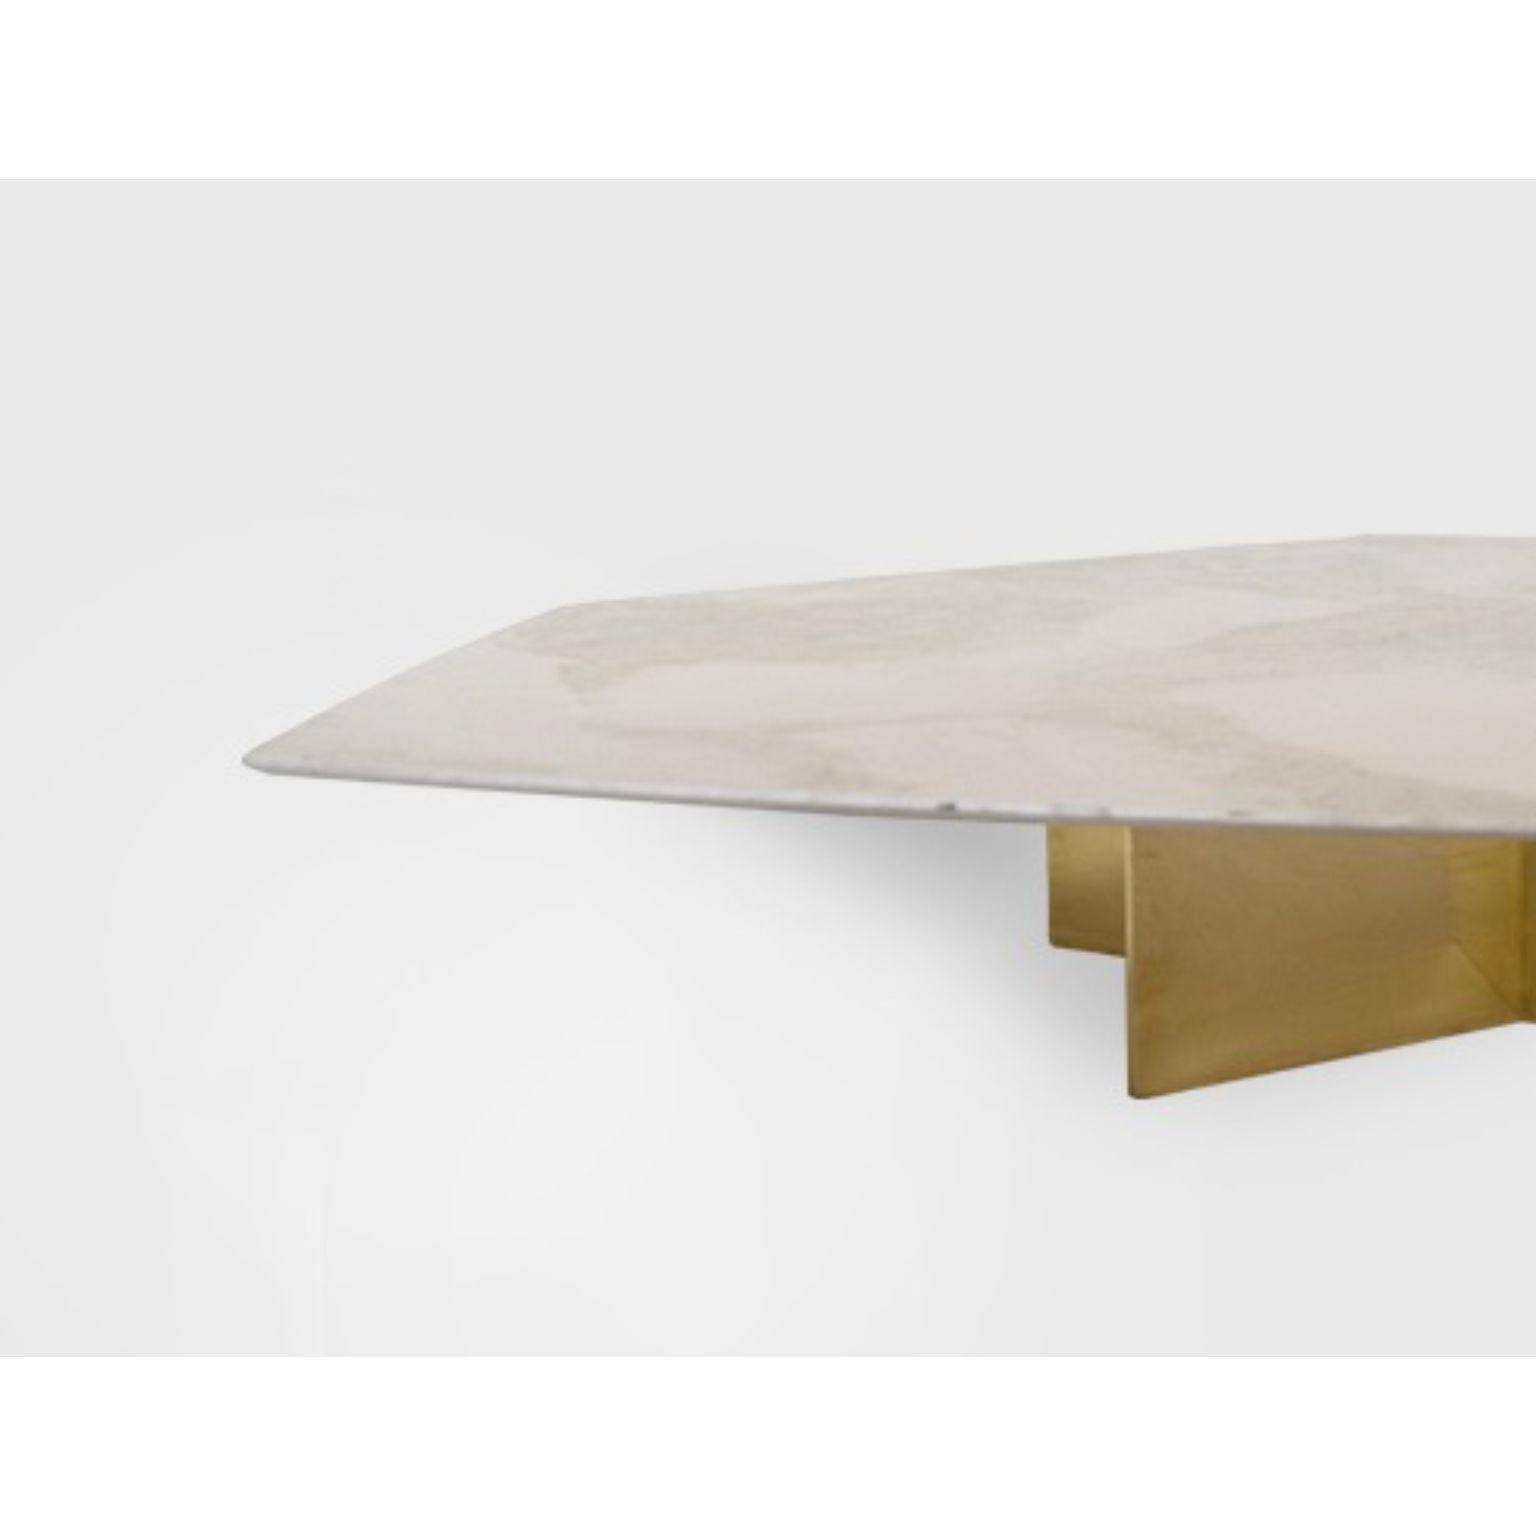 Mexican Geometrik Cristallo Stone and Brass Large Coffee Table by Atra Design For Sale